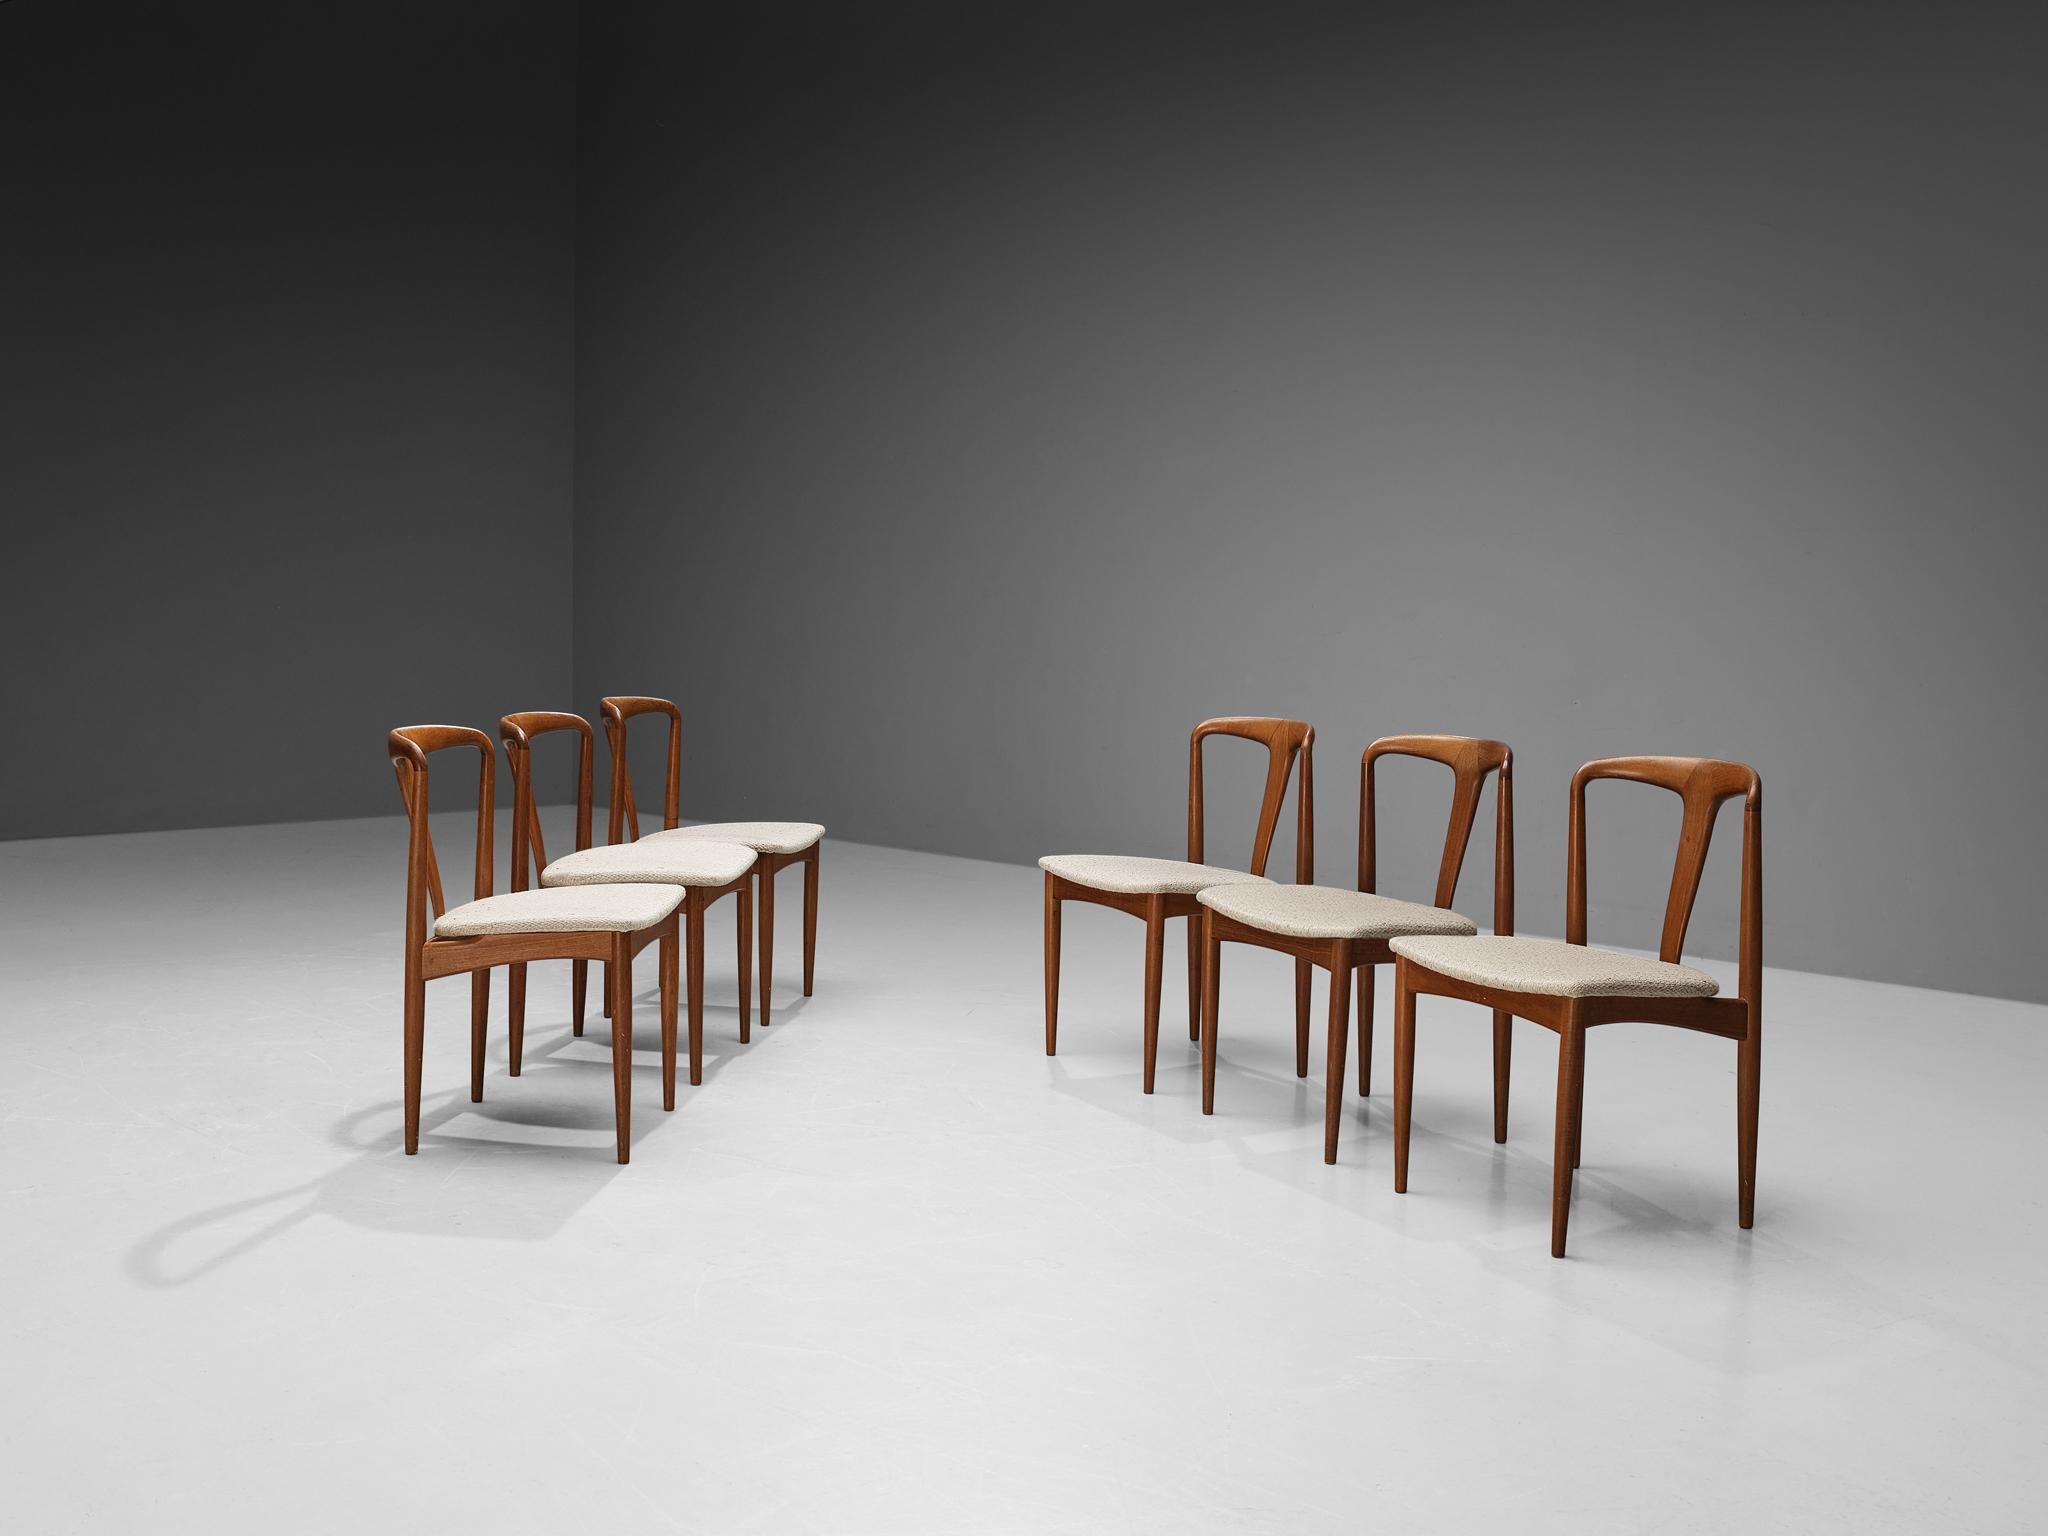 Johannes Andersen for Uldum Møbelfabrik, set of six dining chairs model ‘Juliane’, teak, fabric, Denmark, 1960s

This set of dining chairs is designed by Danish designer Johannes Andersen and produced by Uldum Møbelfabrik in Denmark. The chairs are